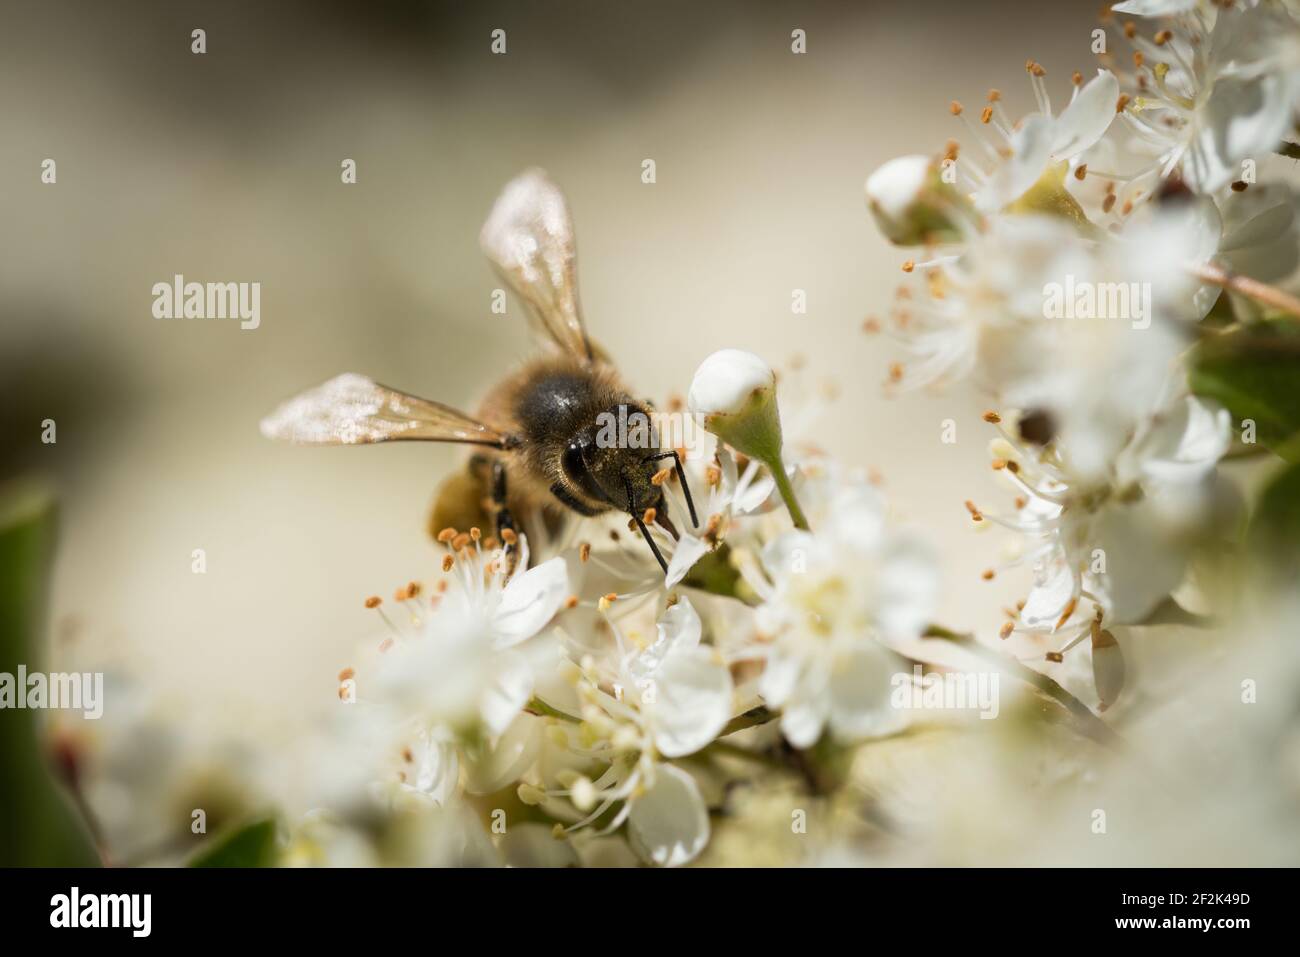 A western honey bee or European honey bee (Apis mellifera) foraging for nectar in the flowers of a blossoming firethorn or pyrocanthus. Stock Photo